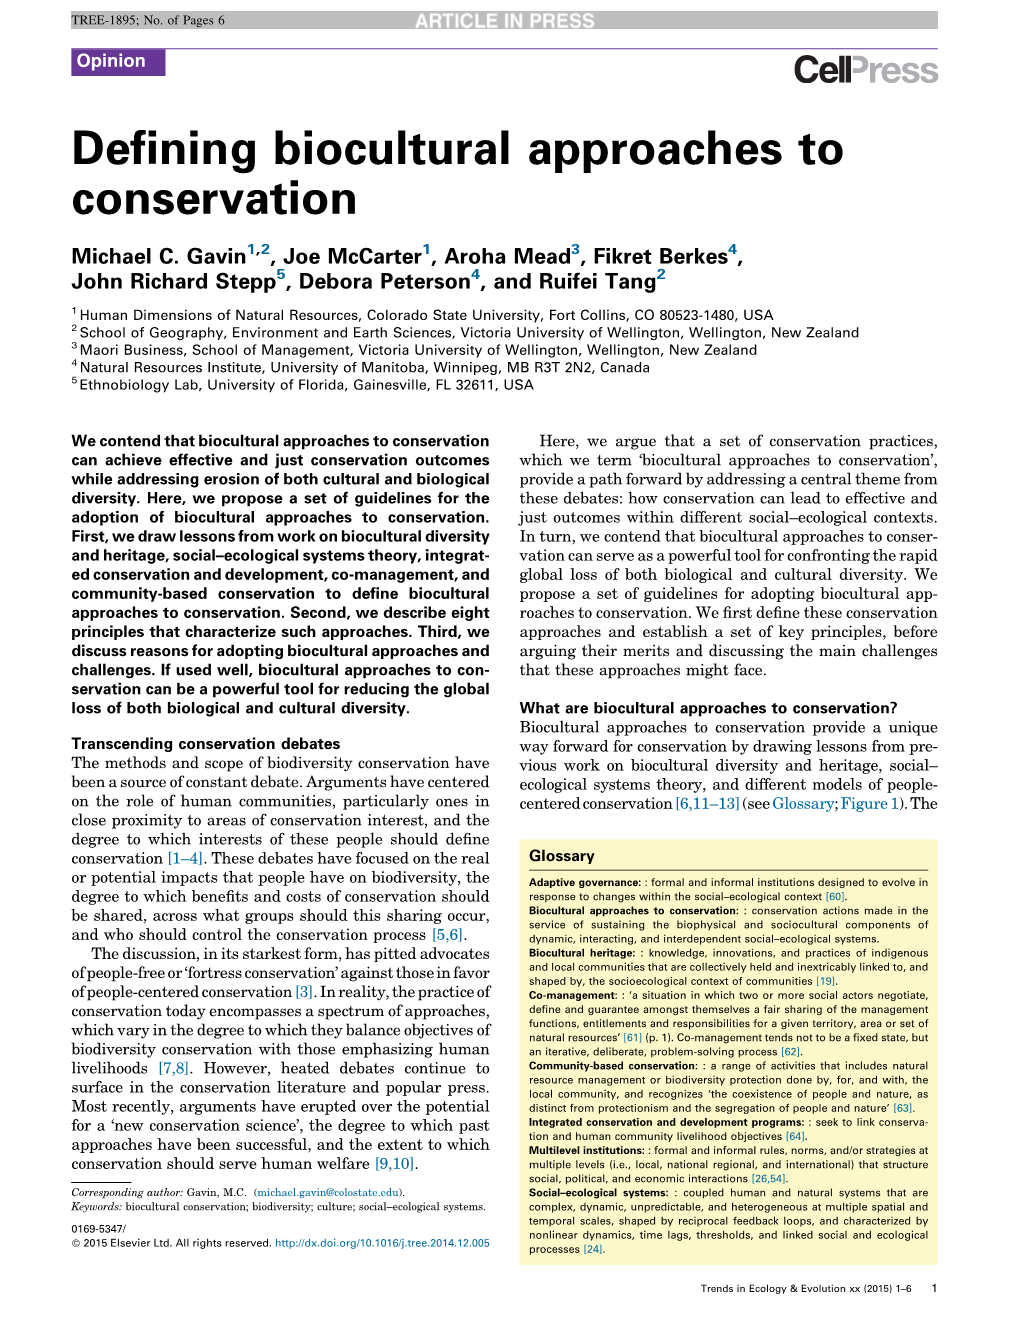 Defining Biocultural Approaches to Conservation